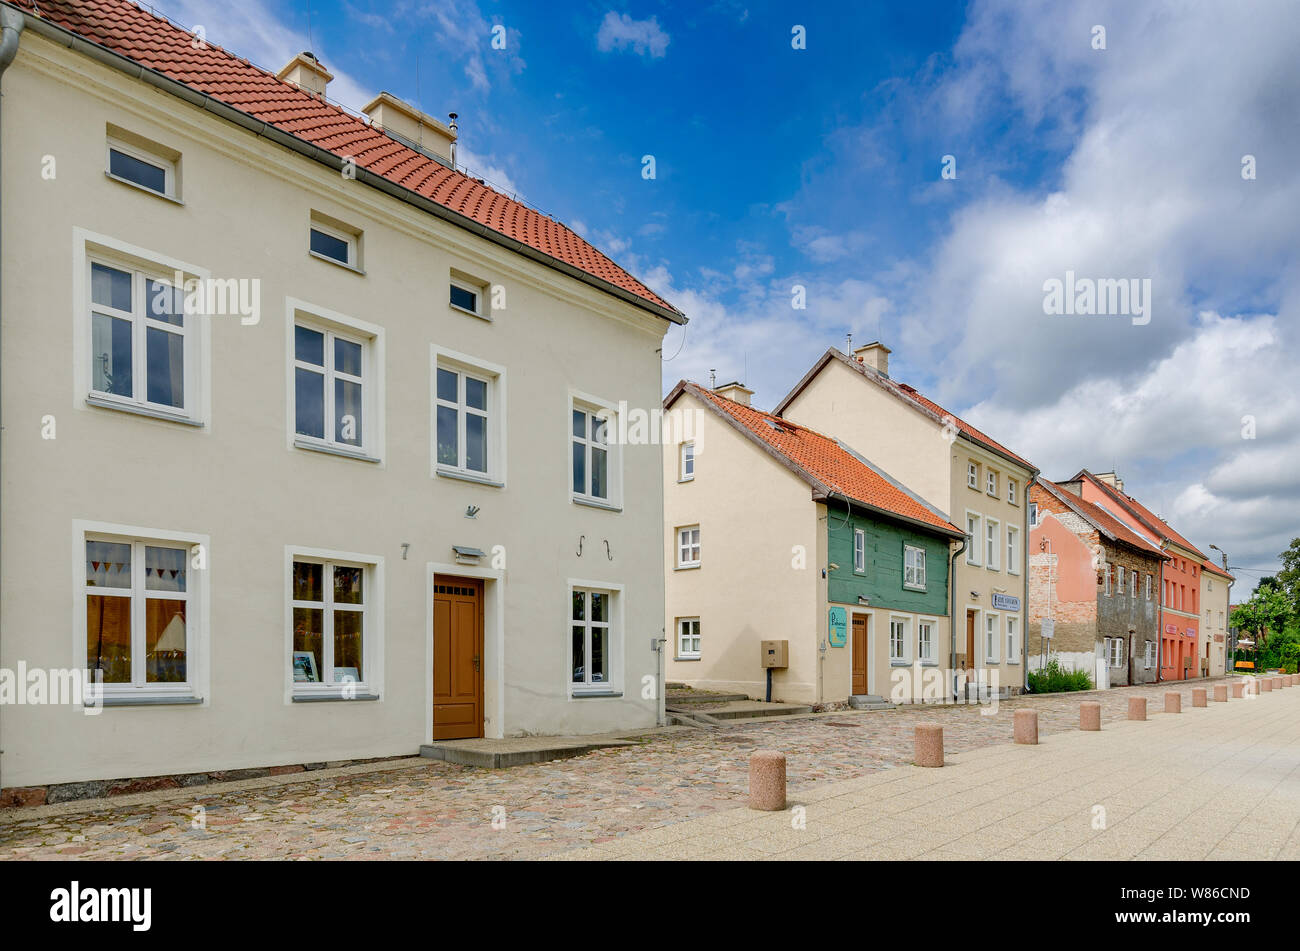 Dobre Miasto, ger. Guttstadt, warmian-mazurian province, Poland.  Open-air city buildings museum - 'Museum by the Tower', 17th cent. houses complex. Stock Photo